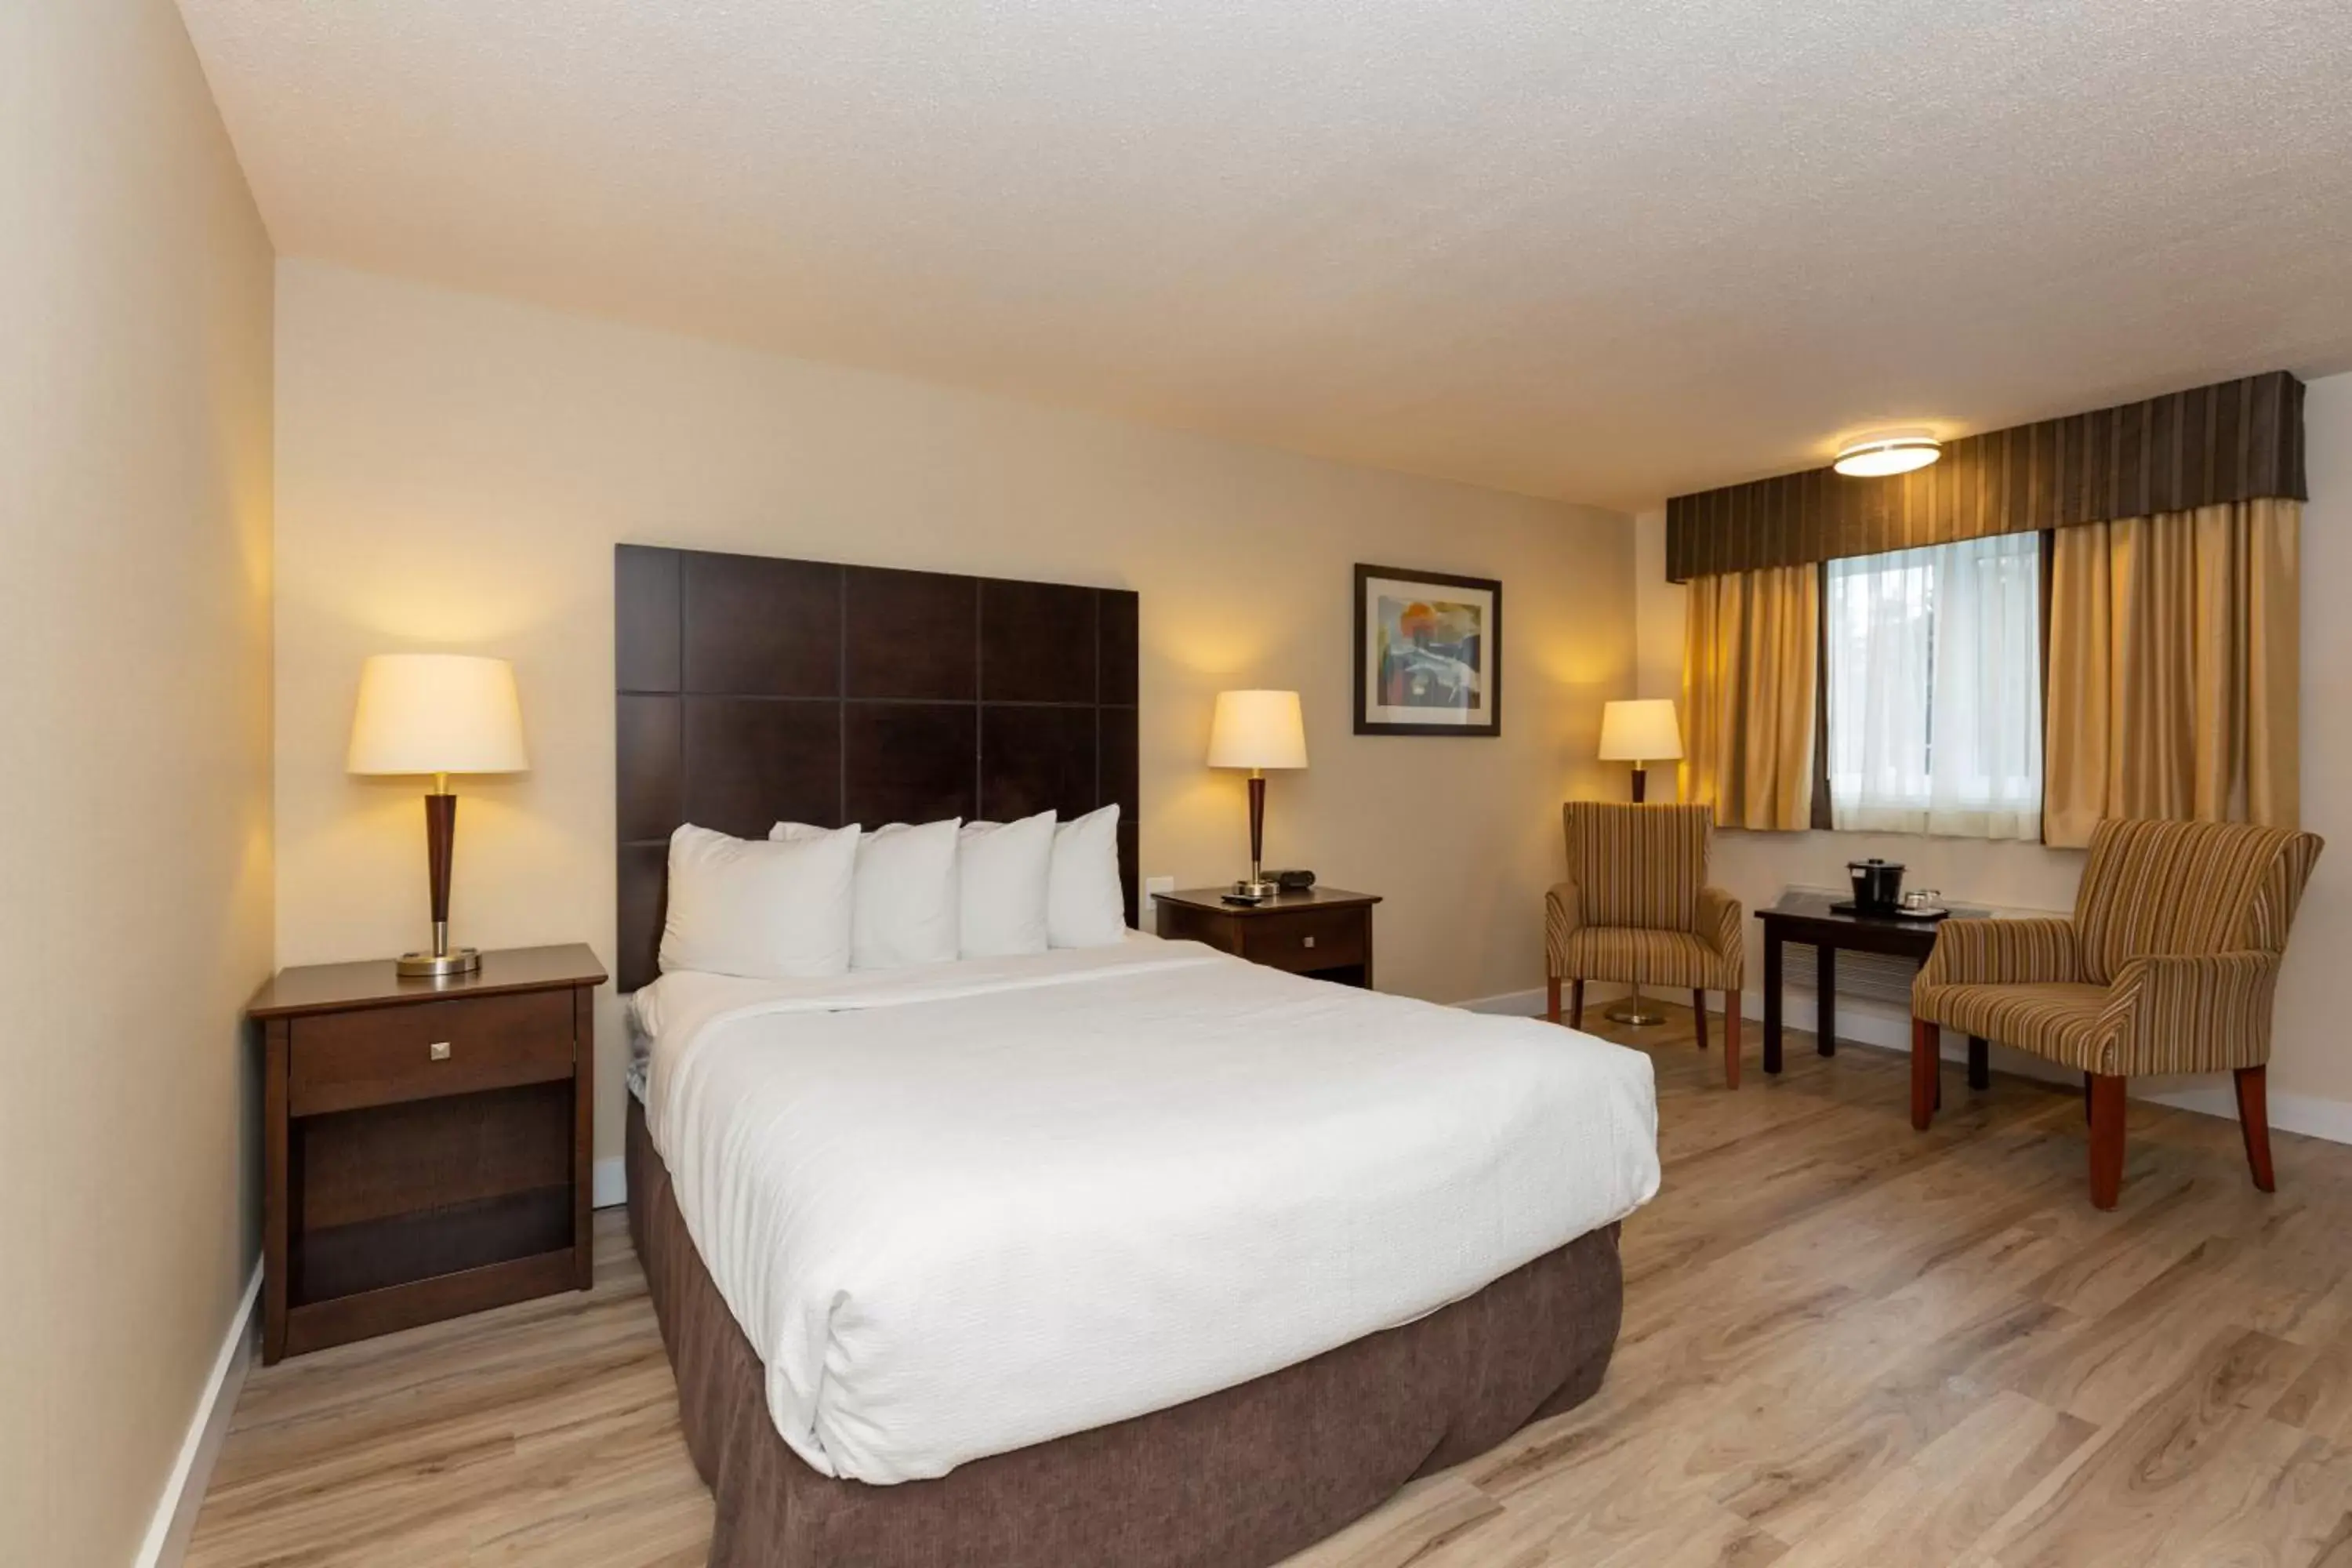 Property building, Bed in Quality Inn & Suites Matane